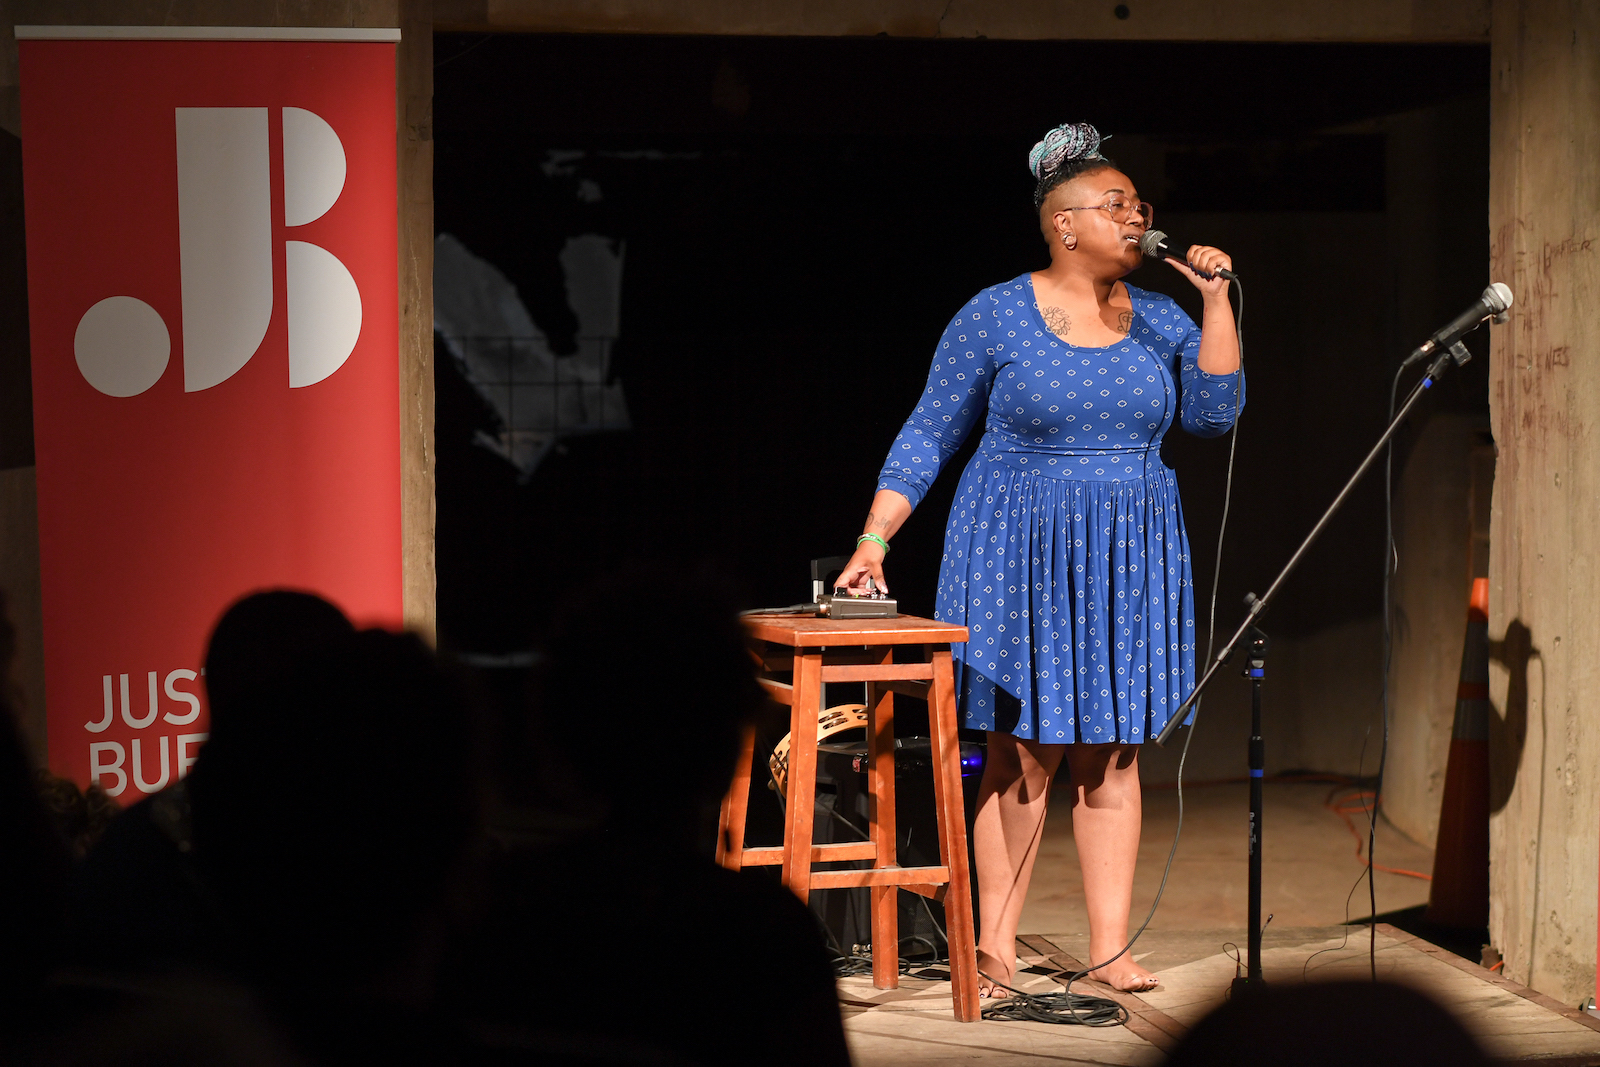 Zoe Scruggs performs at the Silo City Reading Series